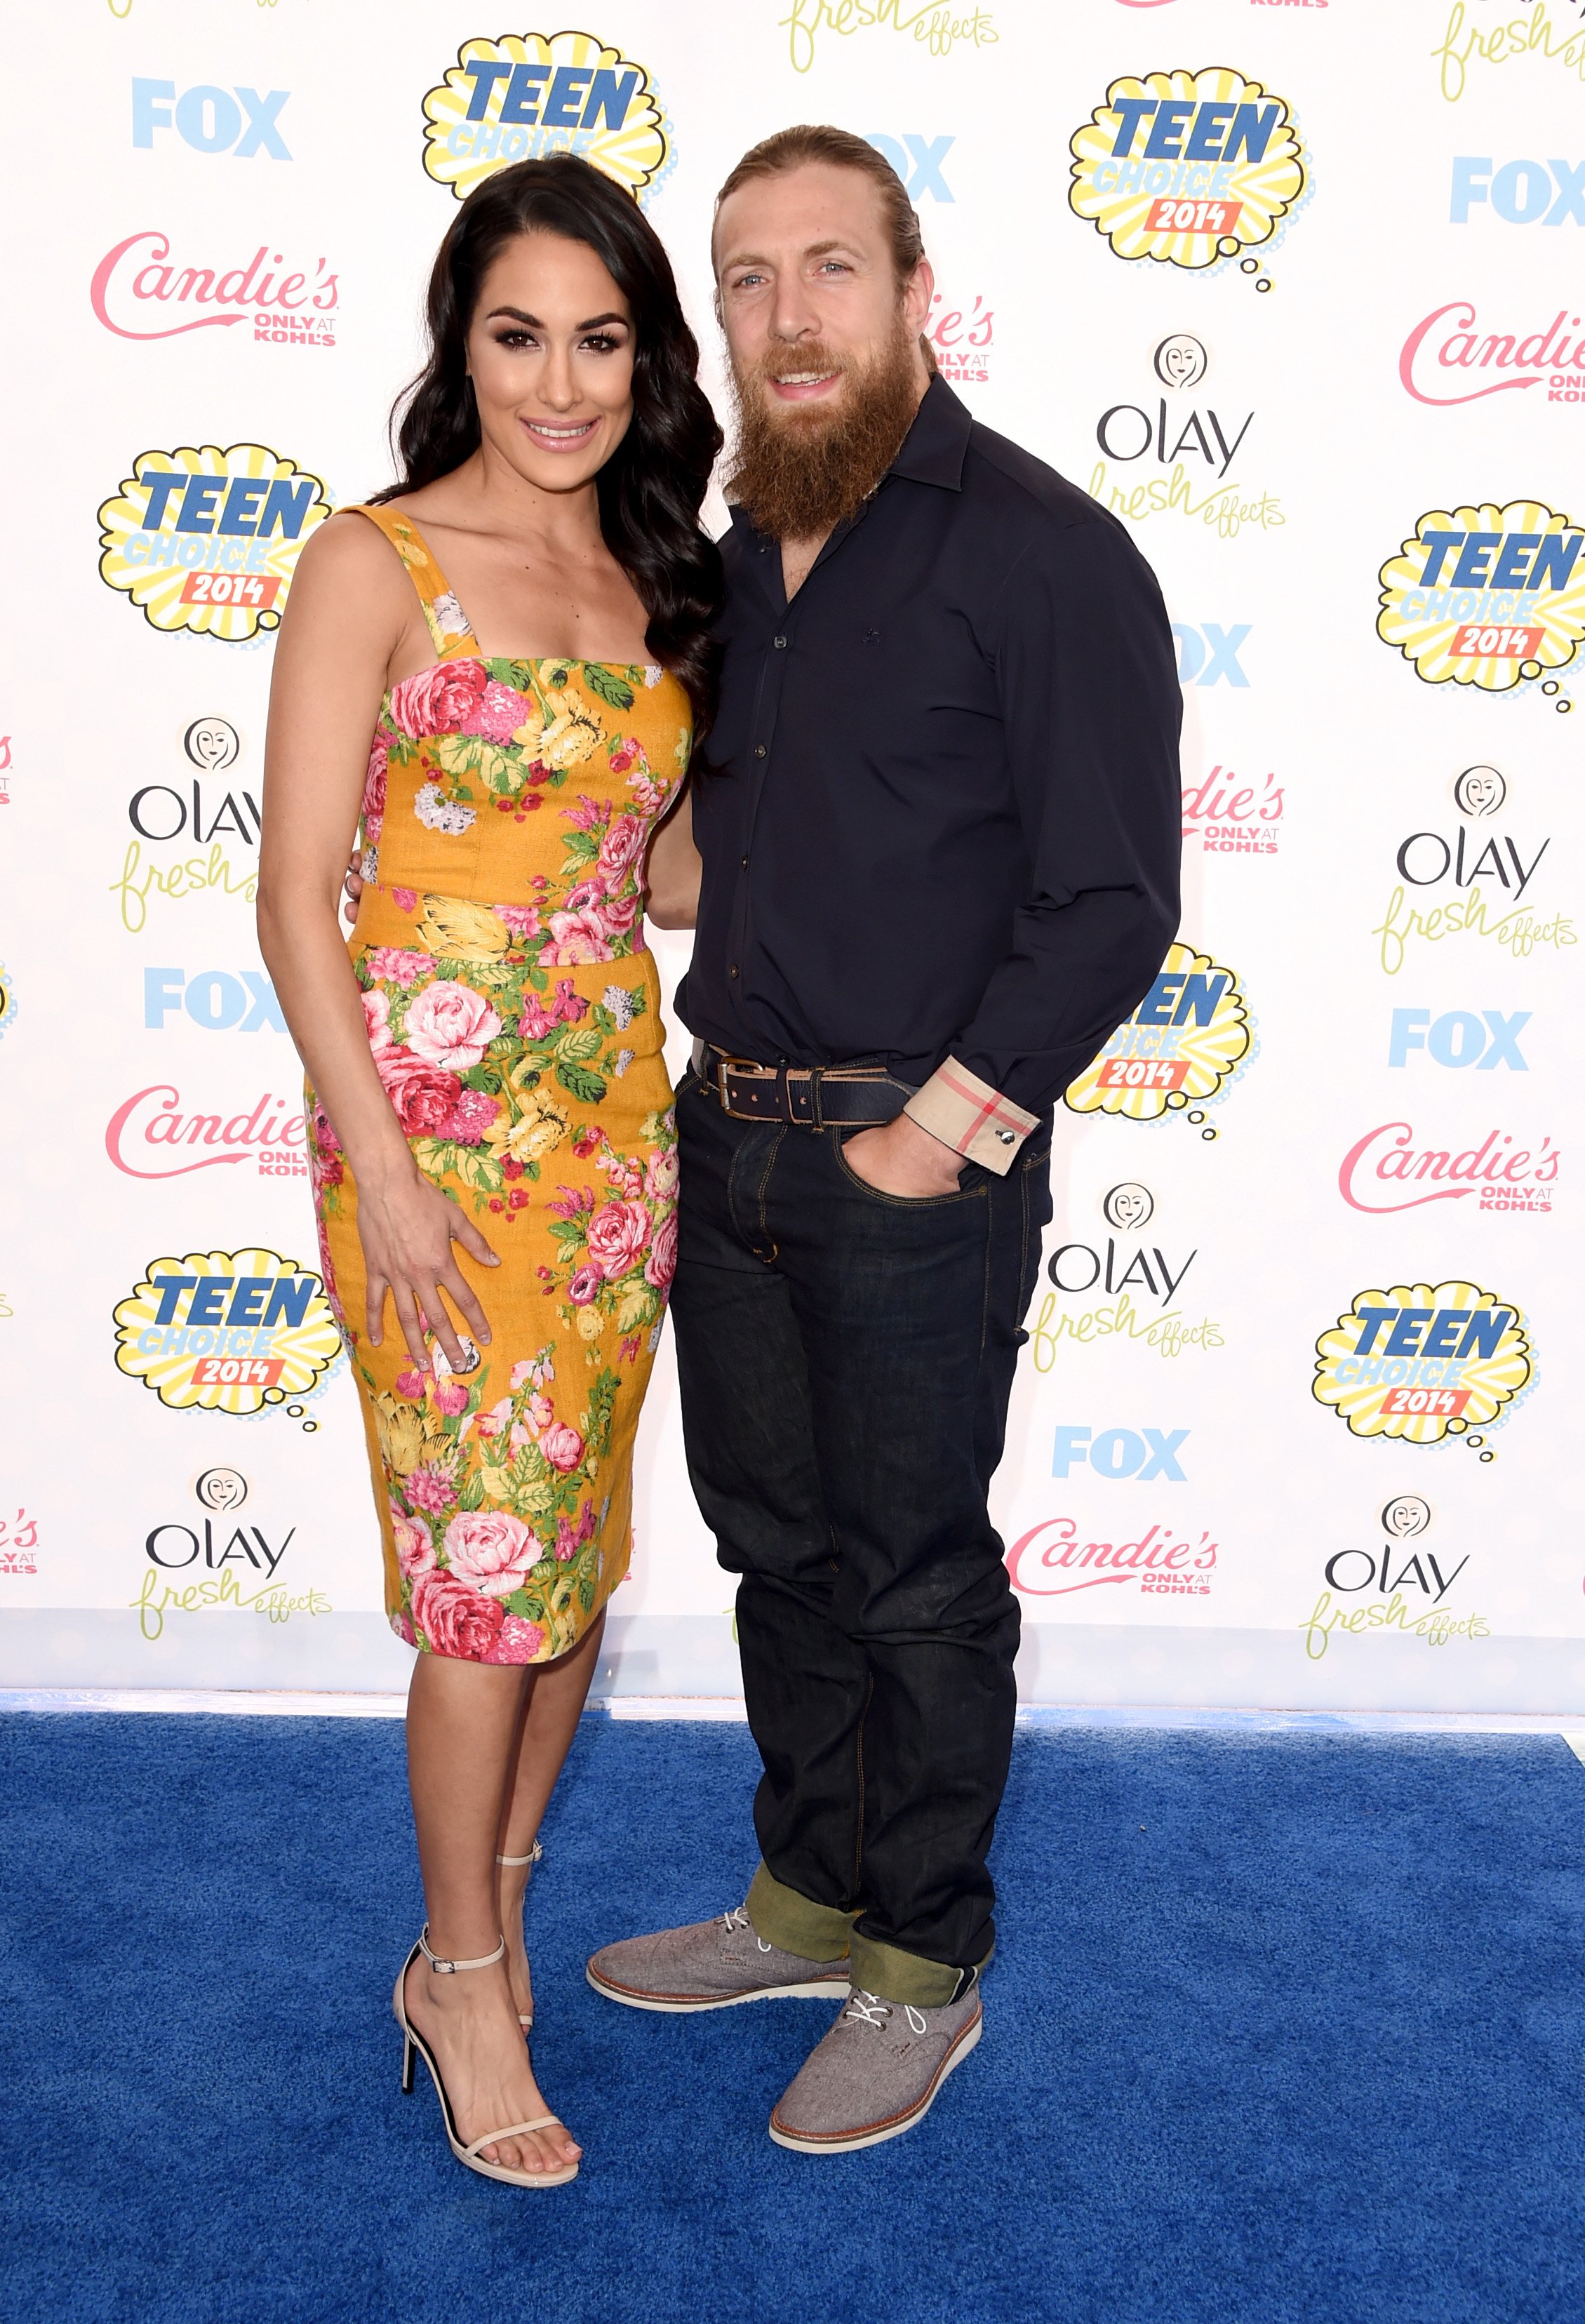 Brie Bella and WWE Superstar Daniel Bryan attend FOX's 2014 Teen Choice Awards on August 10, 2014, in Los Angeles, California. | Source: Getty Images.